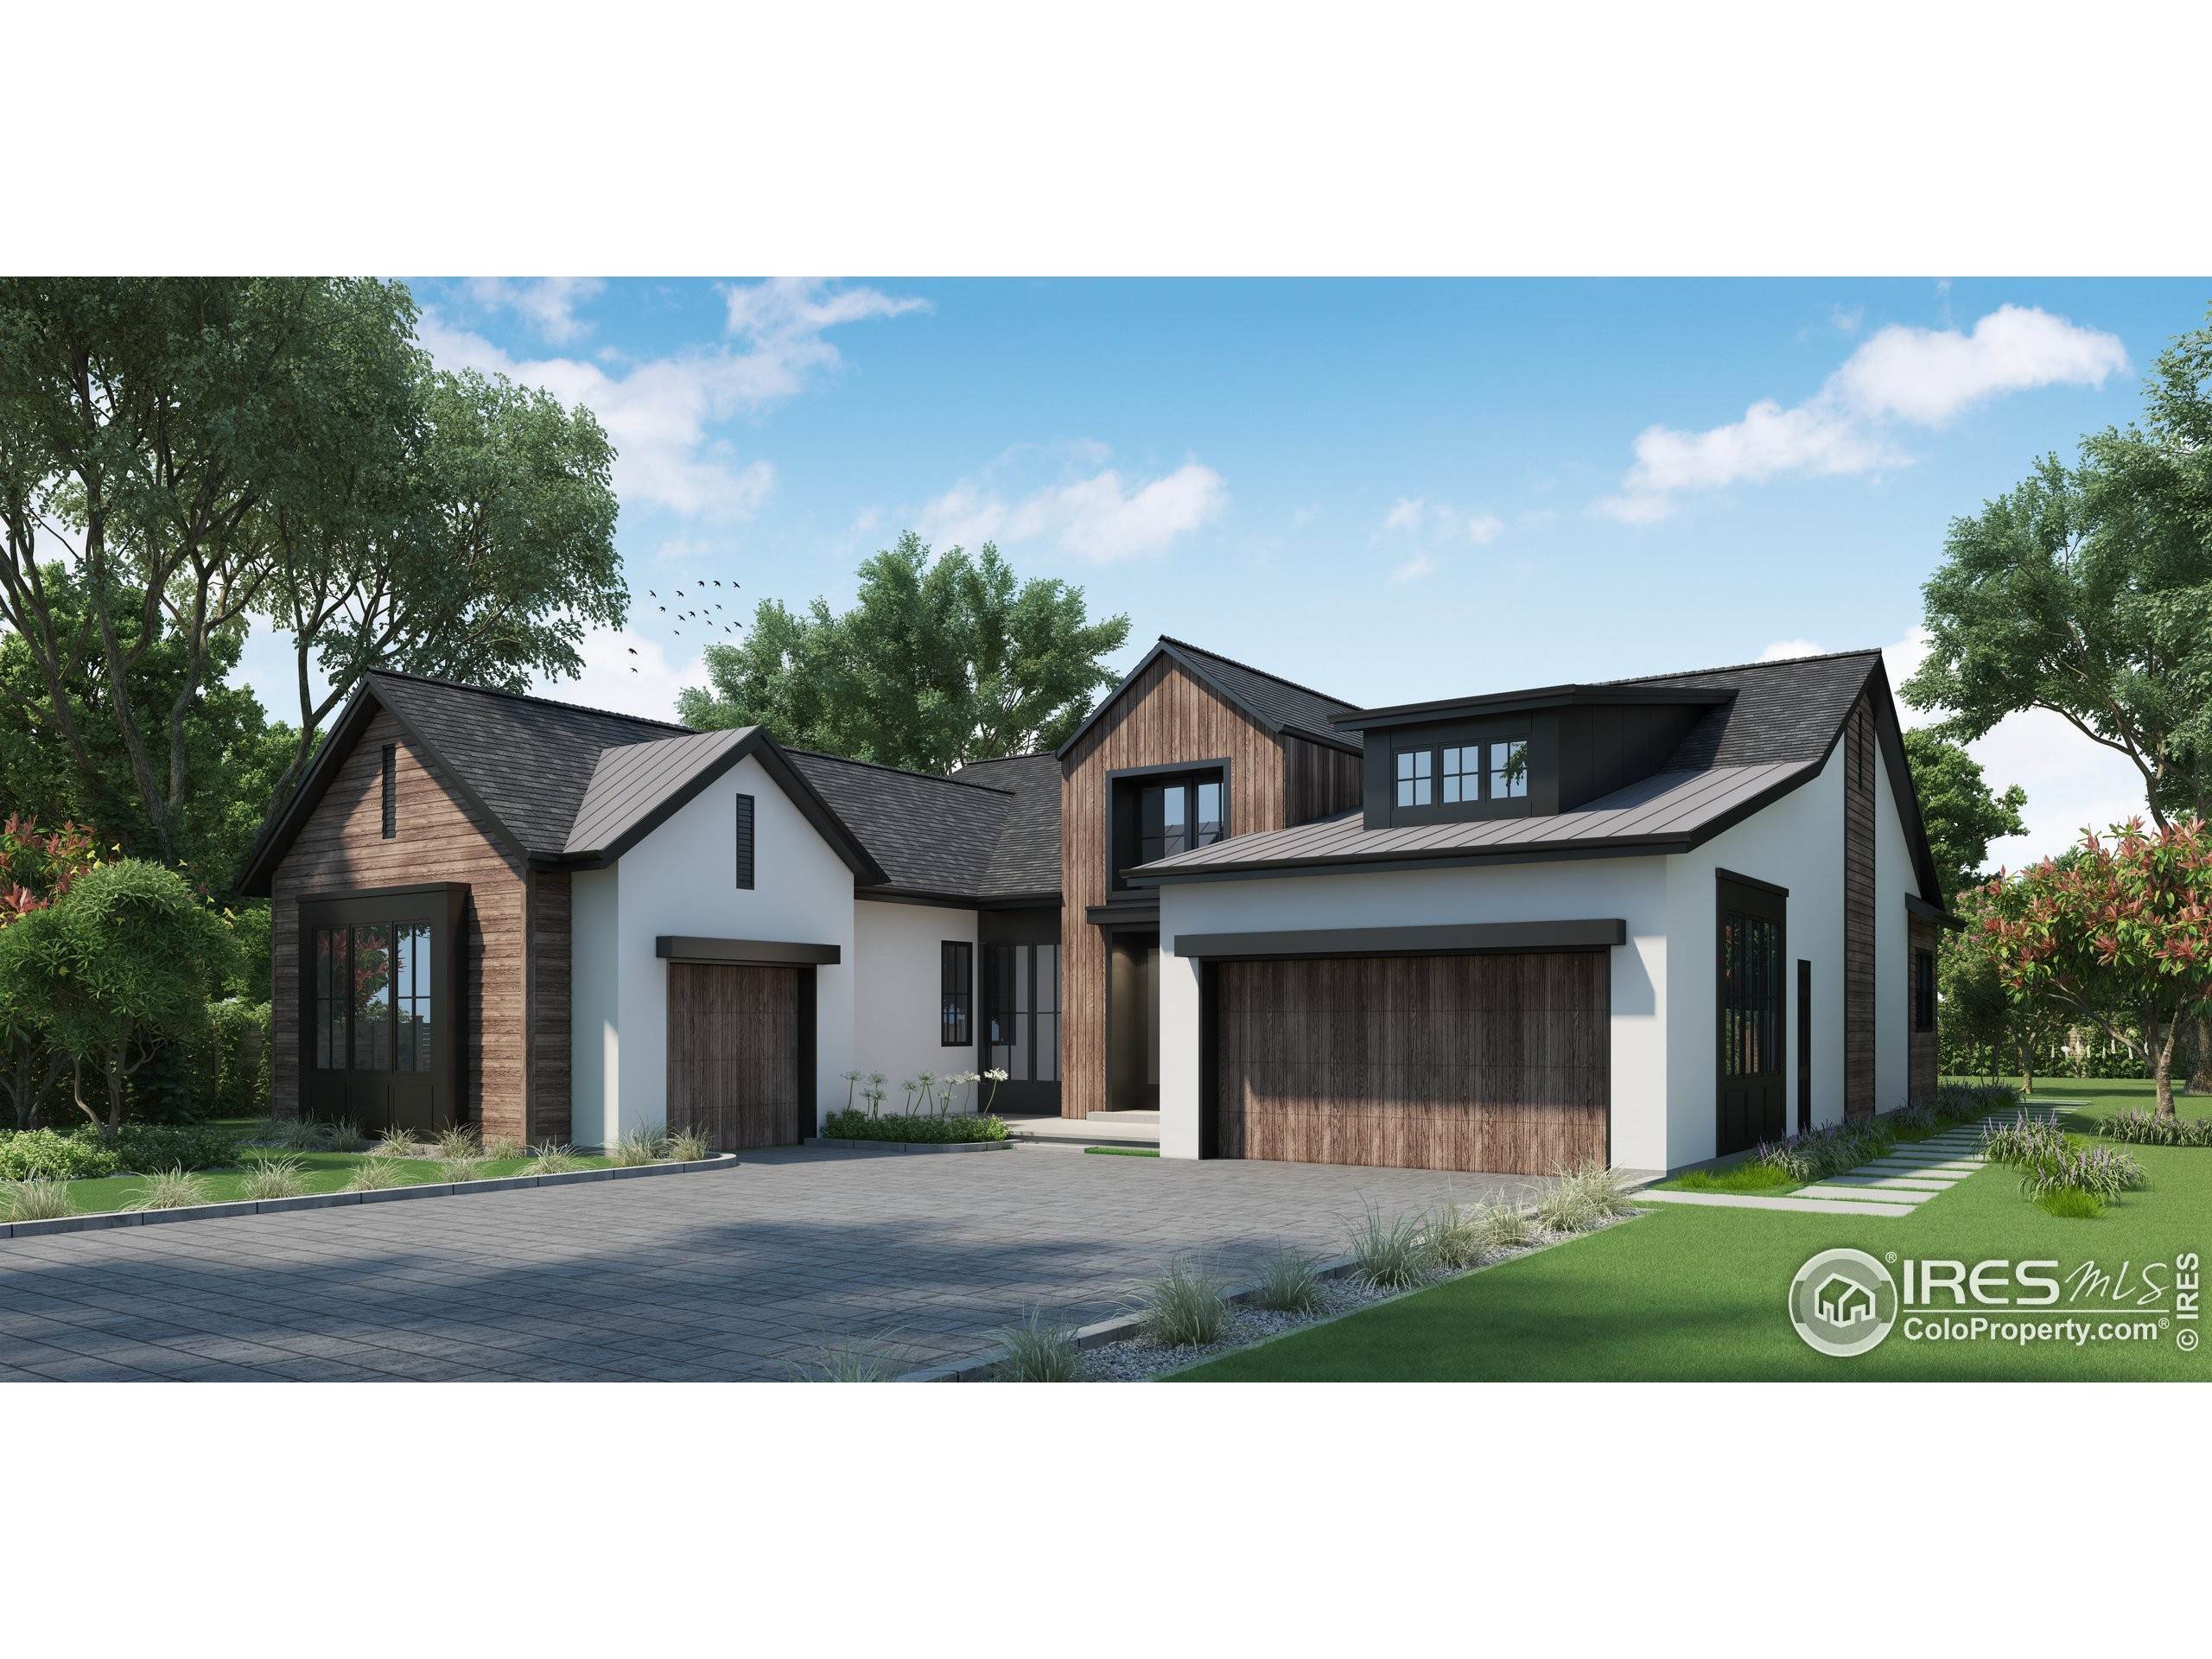 Single Family Homes for Active at 1201 W 144th Avenue Westminster, Colorado 80023 United States